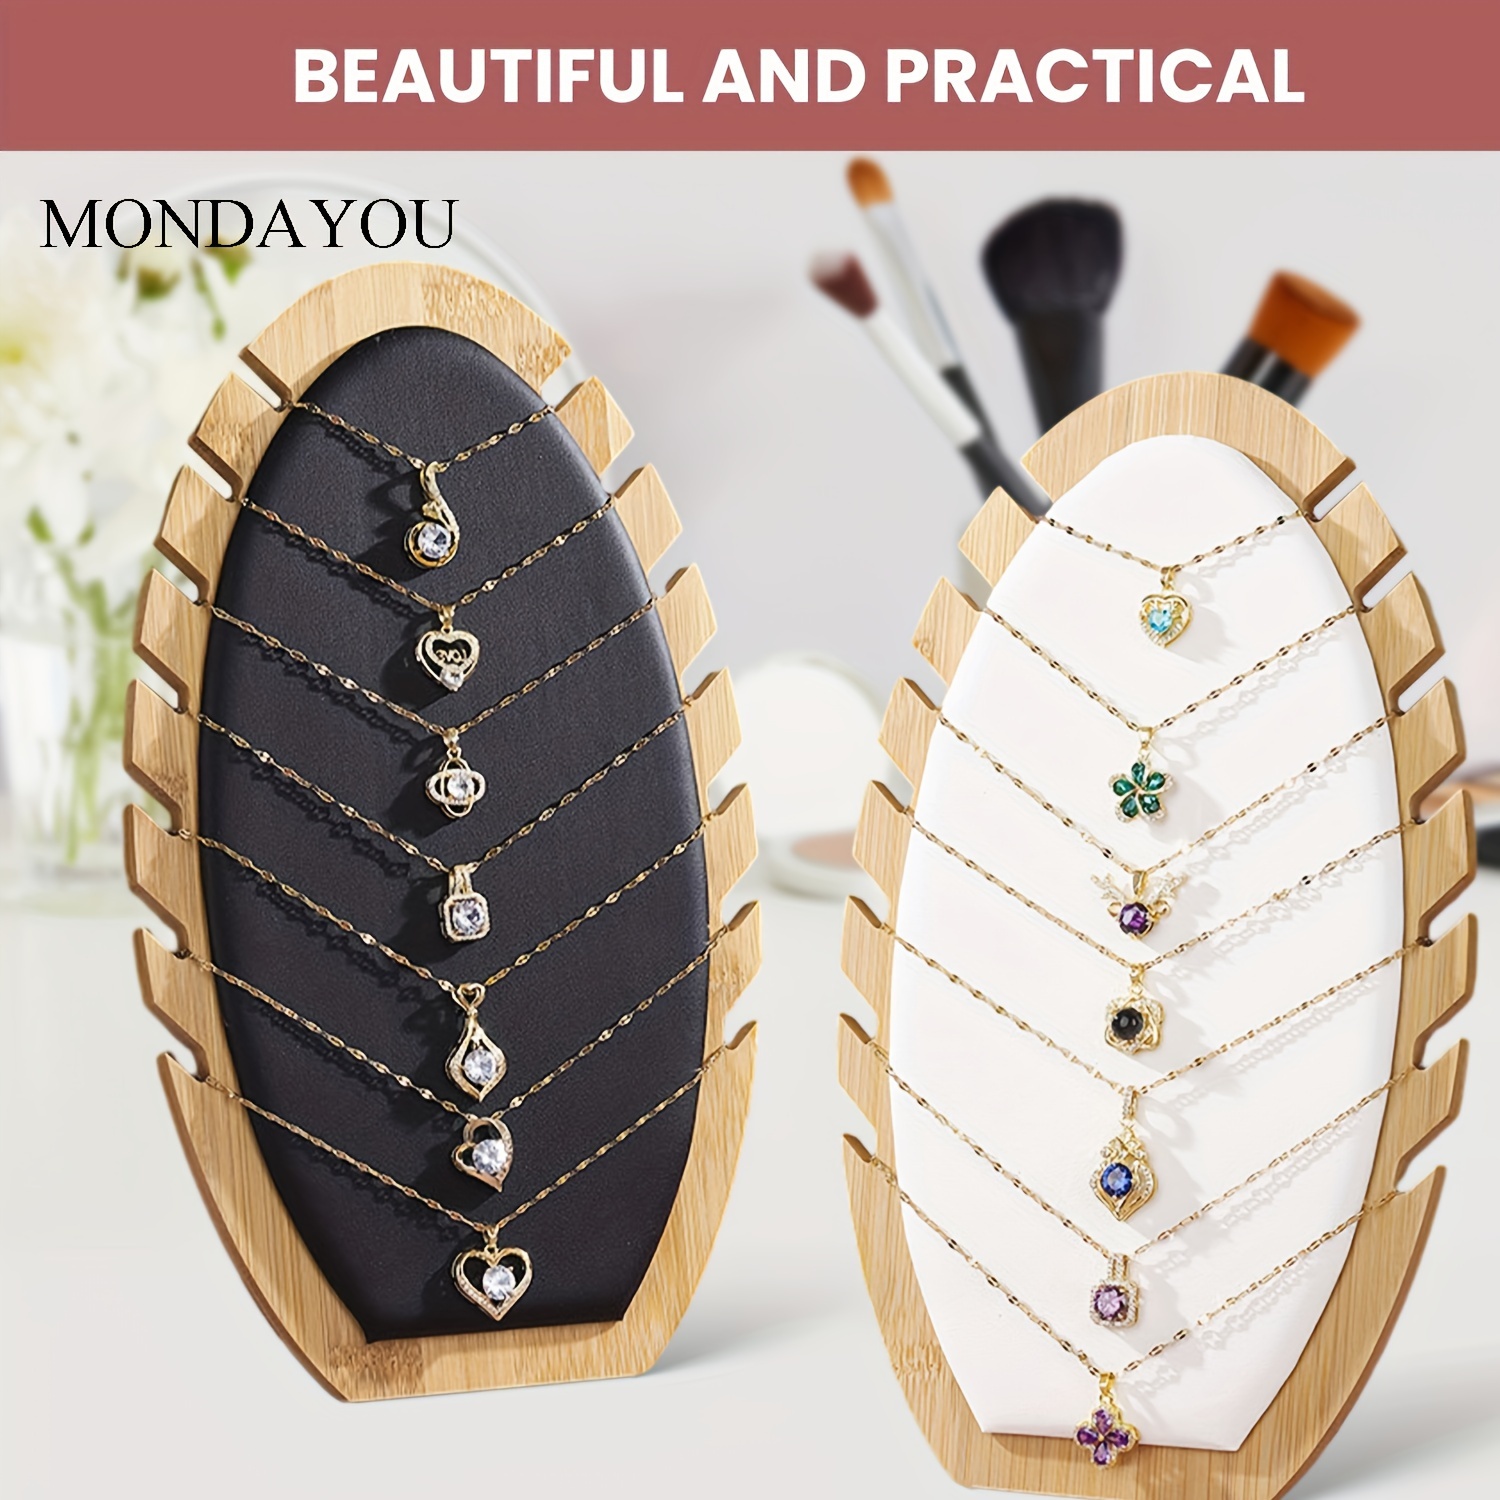 

1pc Bamboo Necklace Organizer Holder With Detachable Oval Tabletop Jewelry Display Boards And Pu Leather Soft Mat For 12 Necklaces, 10.4x6.3x2.8 Inches Wooden Necklace Display Stand